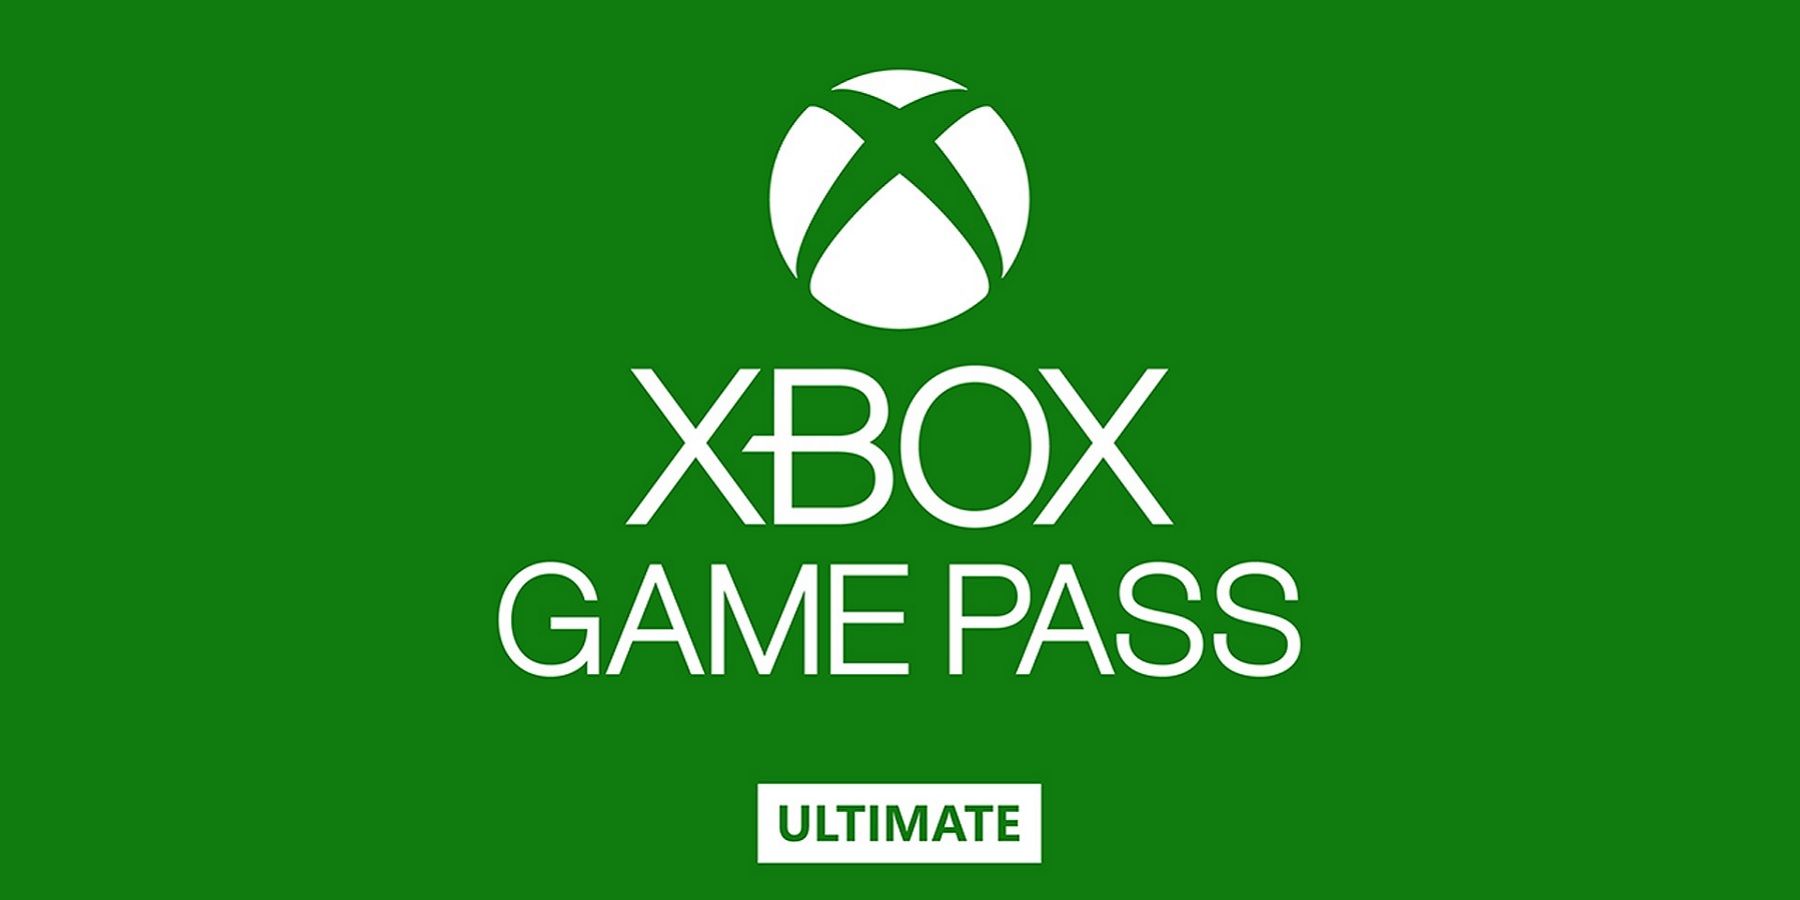 Xbox Game Pass Ultimate Adds 3 Games Today